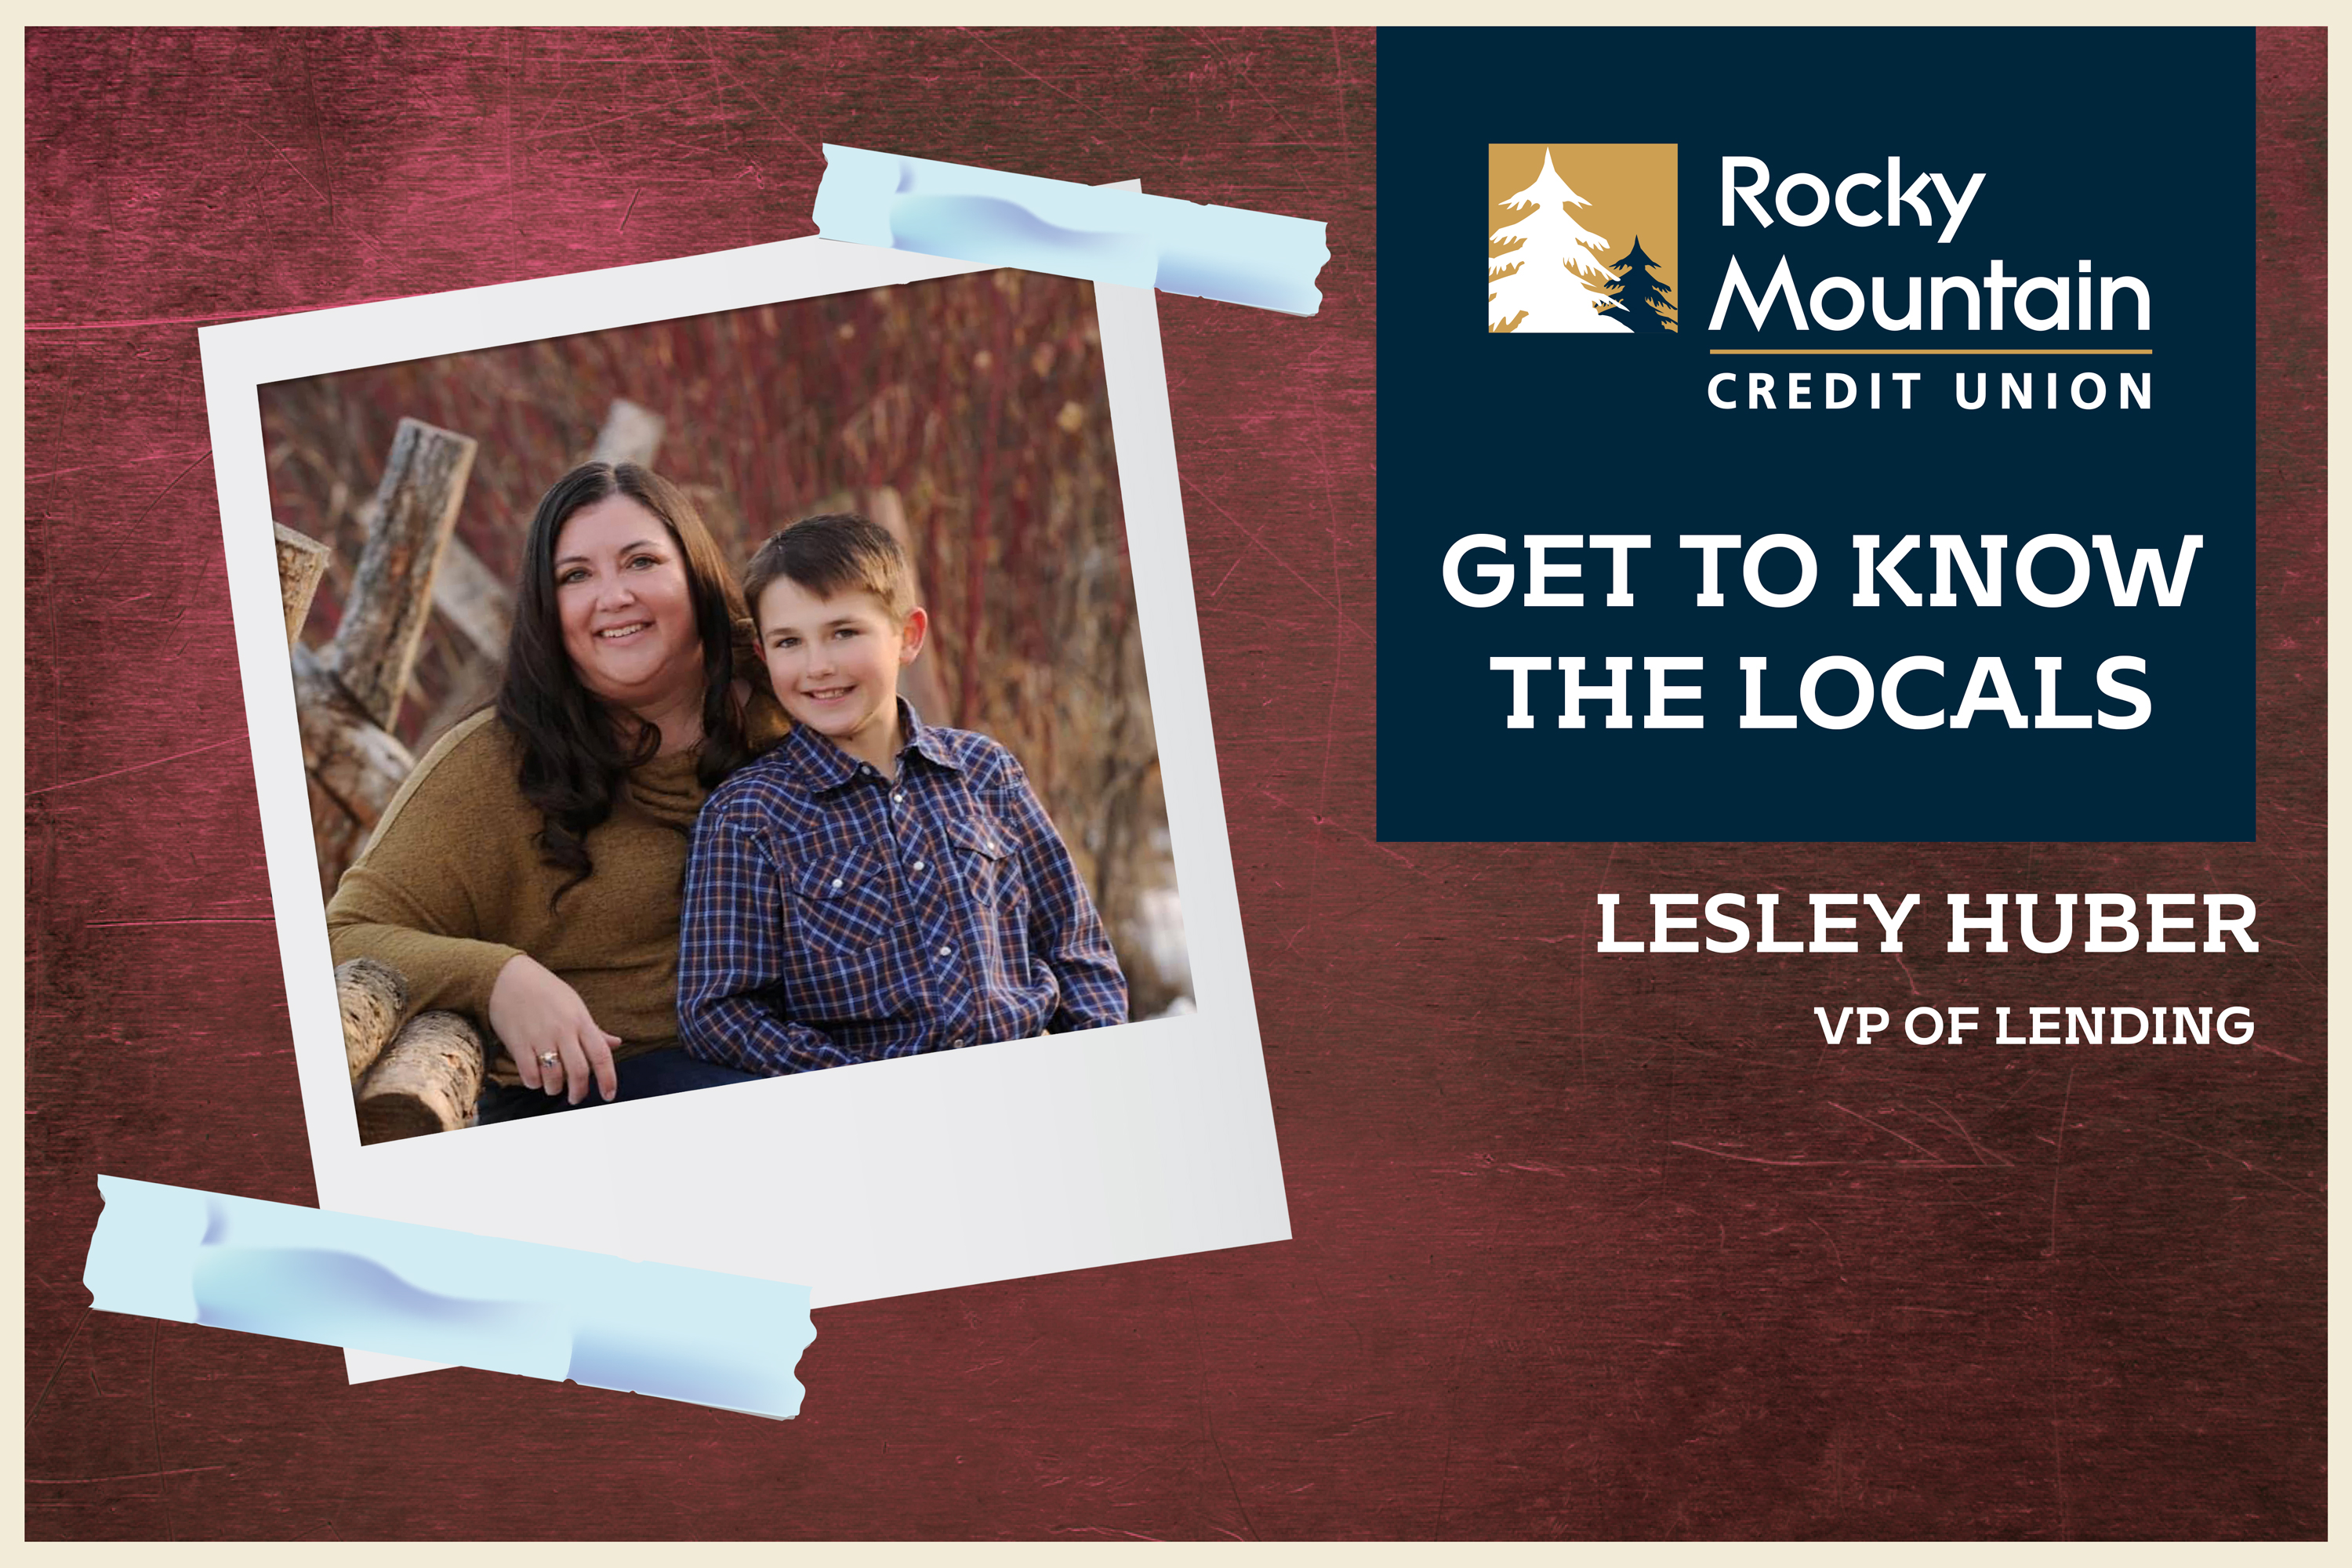 Lesley Huber, VP of Lending at Rocky Mountain Credit Union